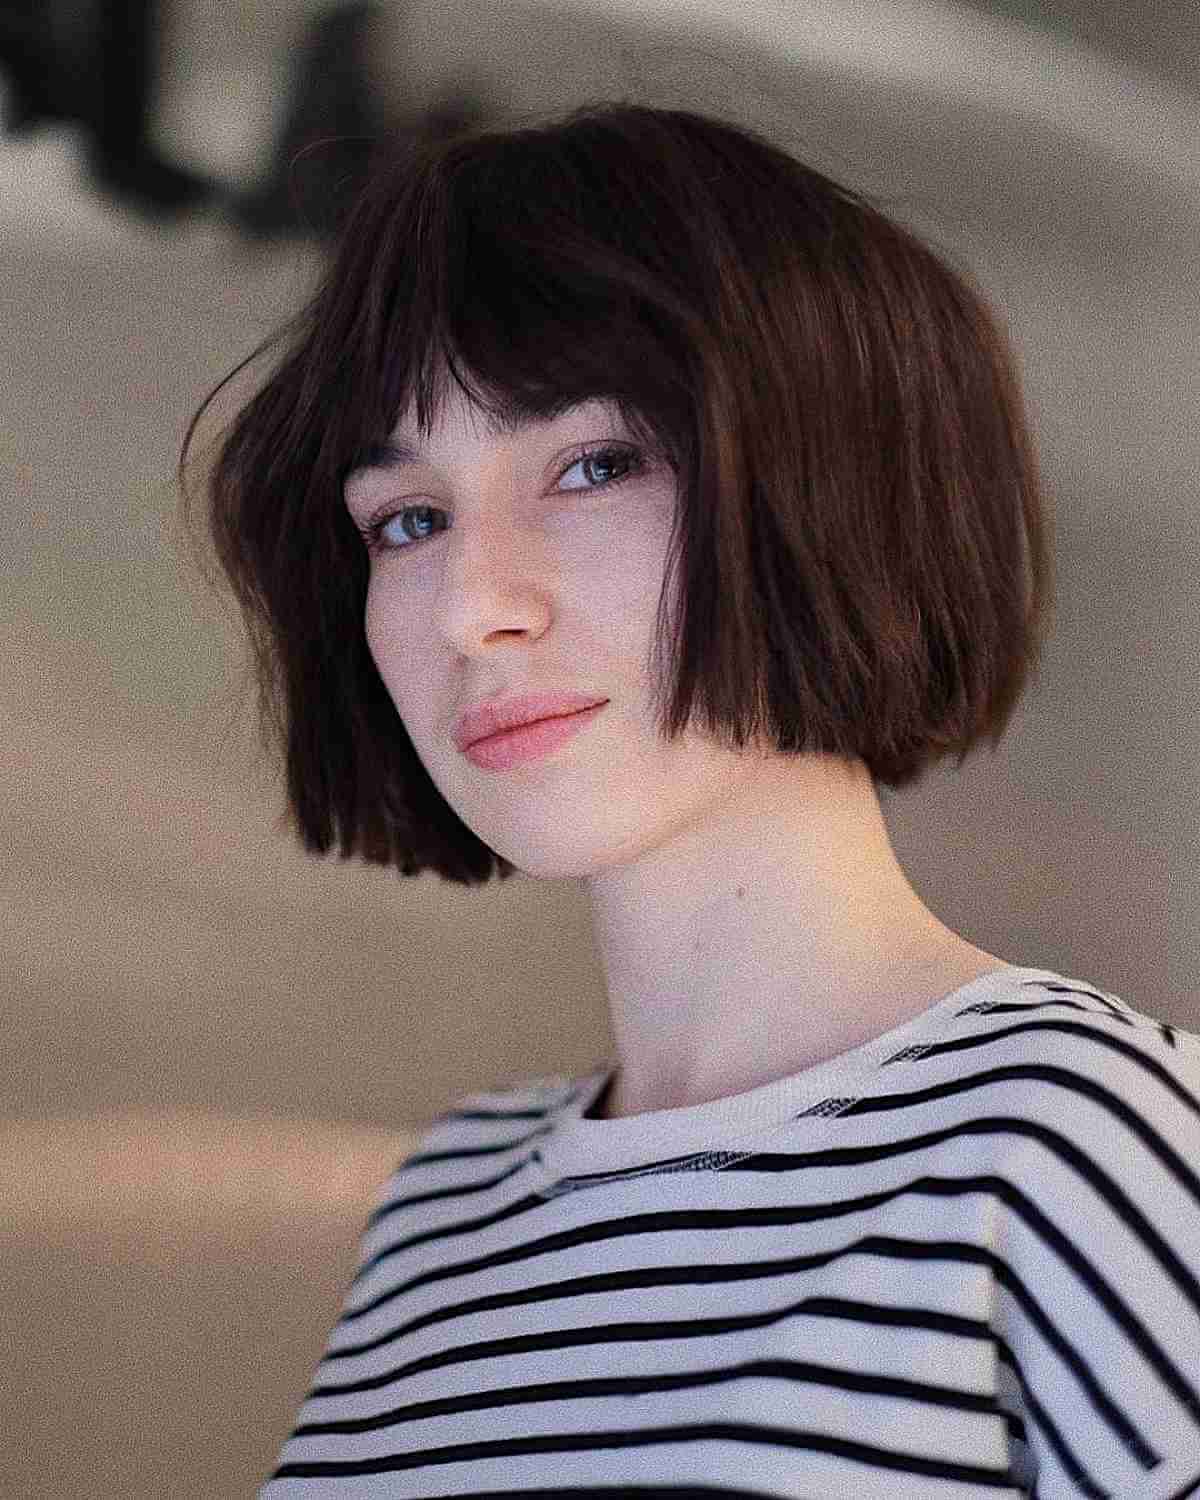 28 Super-Cute Jaw-Length Haircut Ideas Taking Over Salons